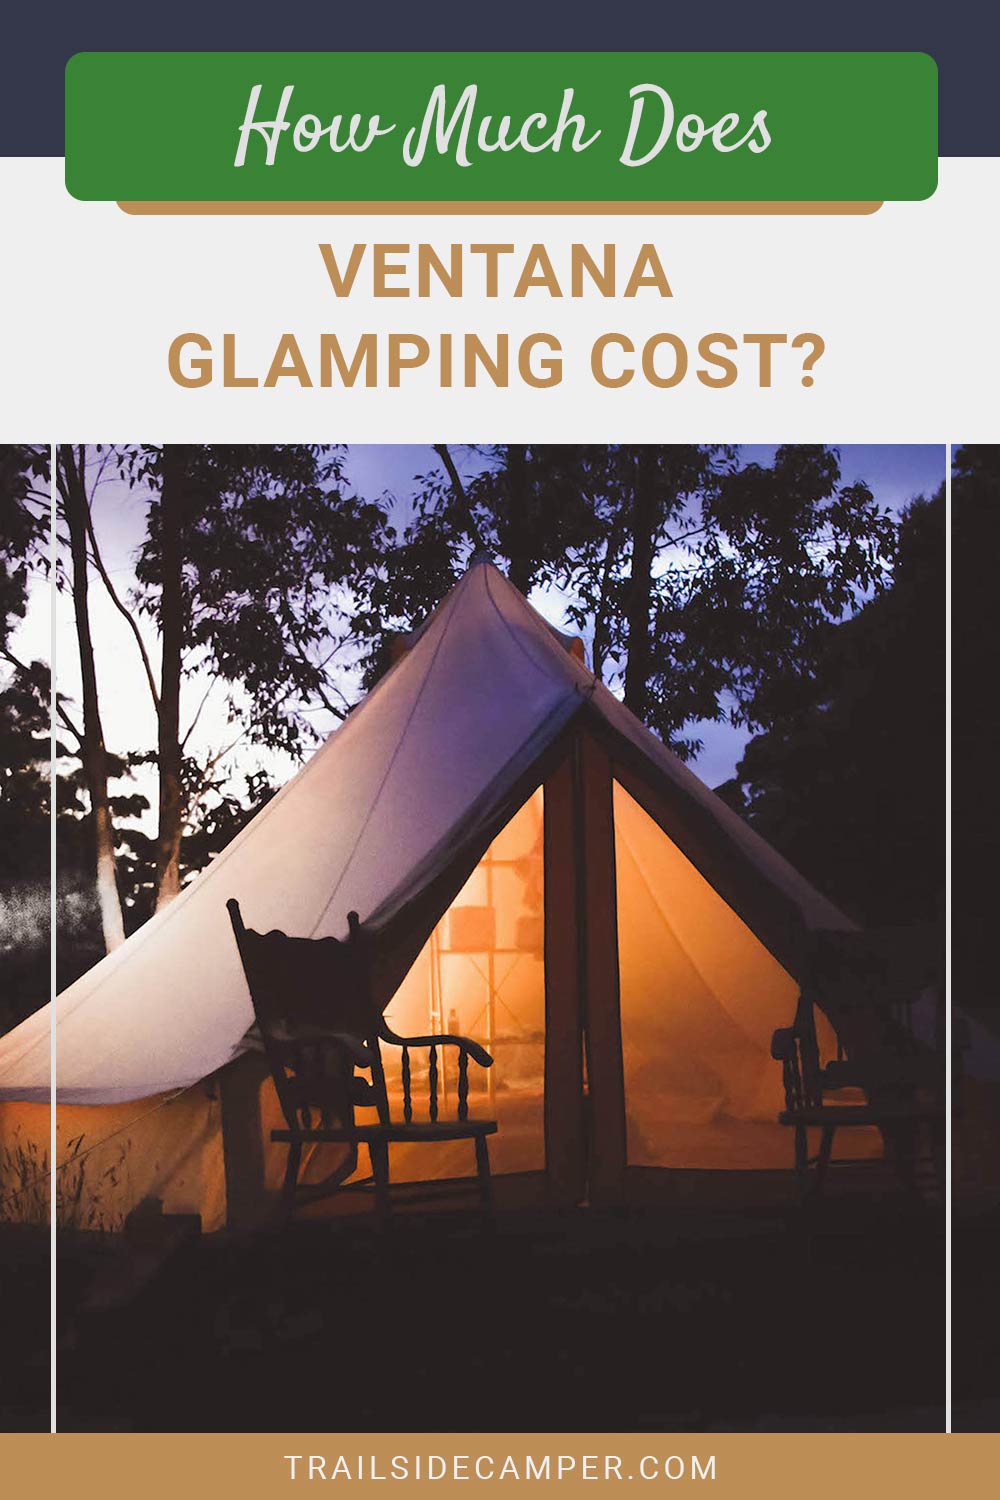 How Much Does Ventana Glamping Cost?